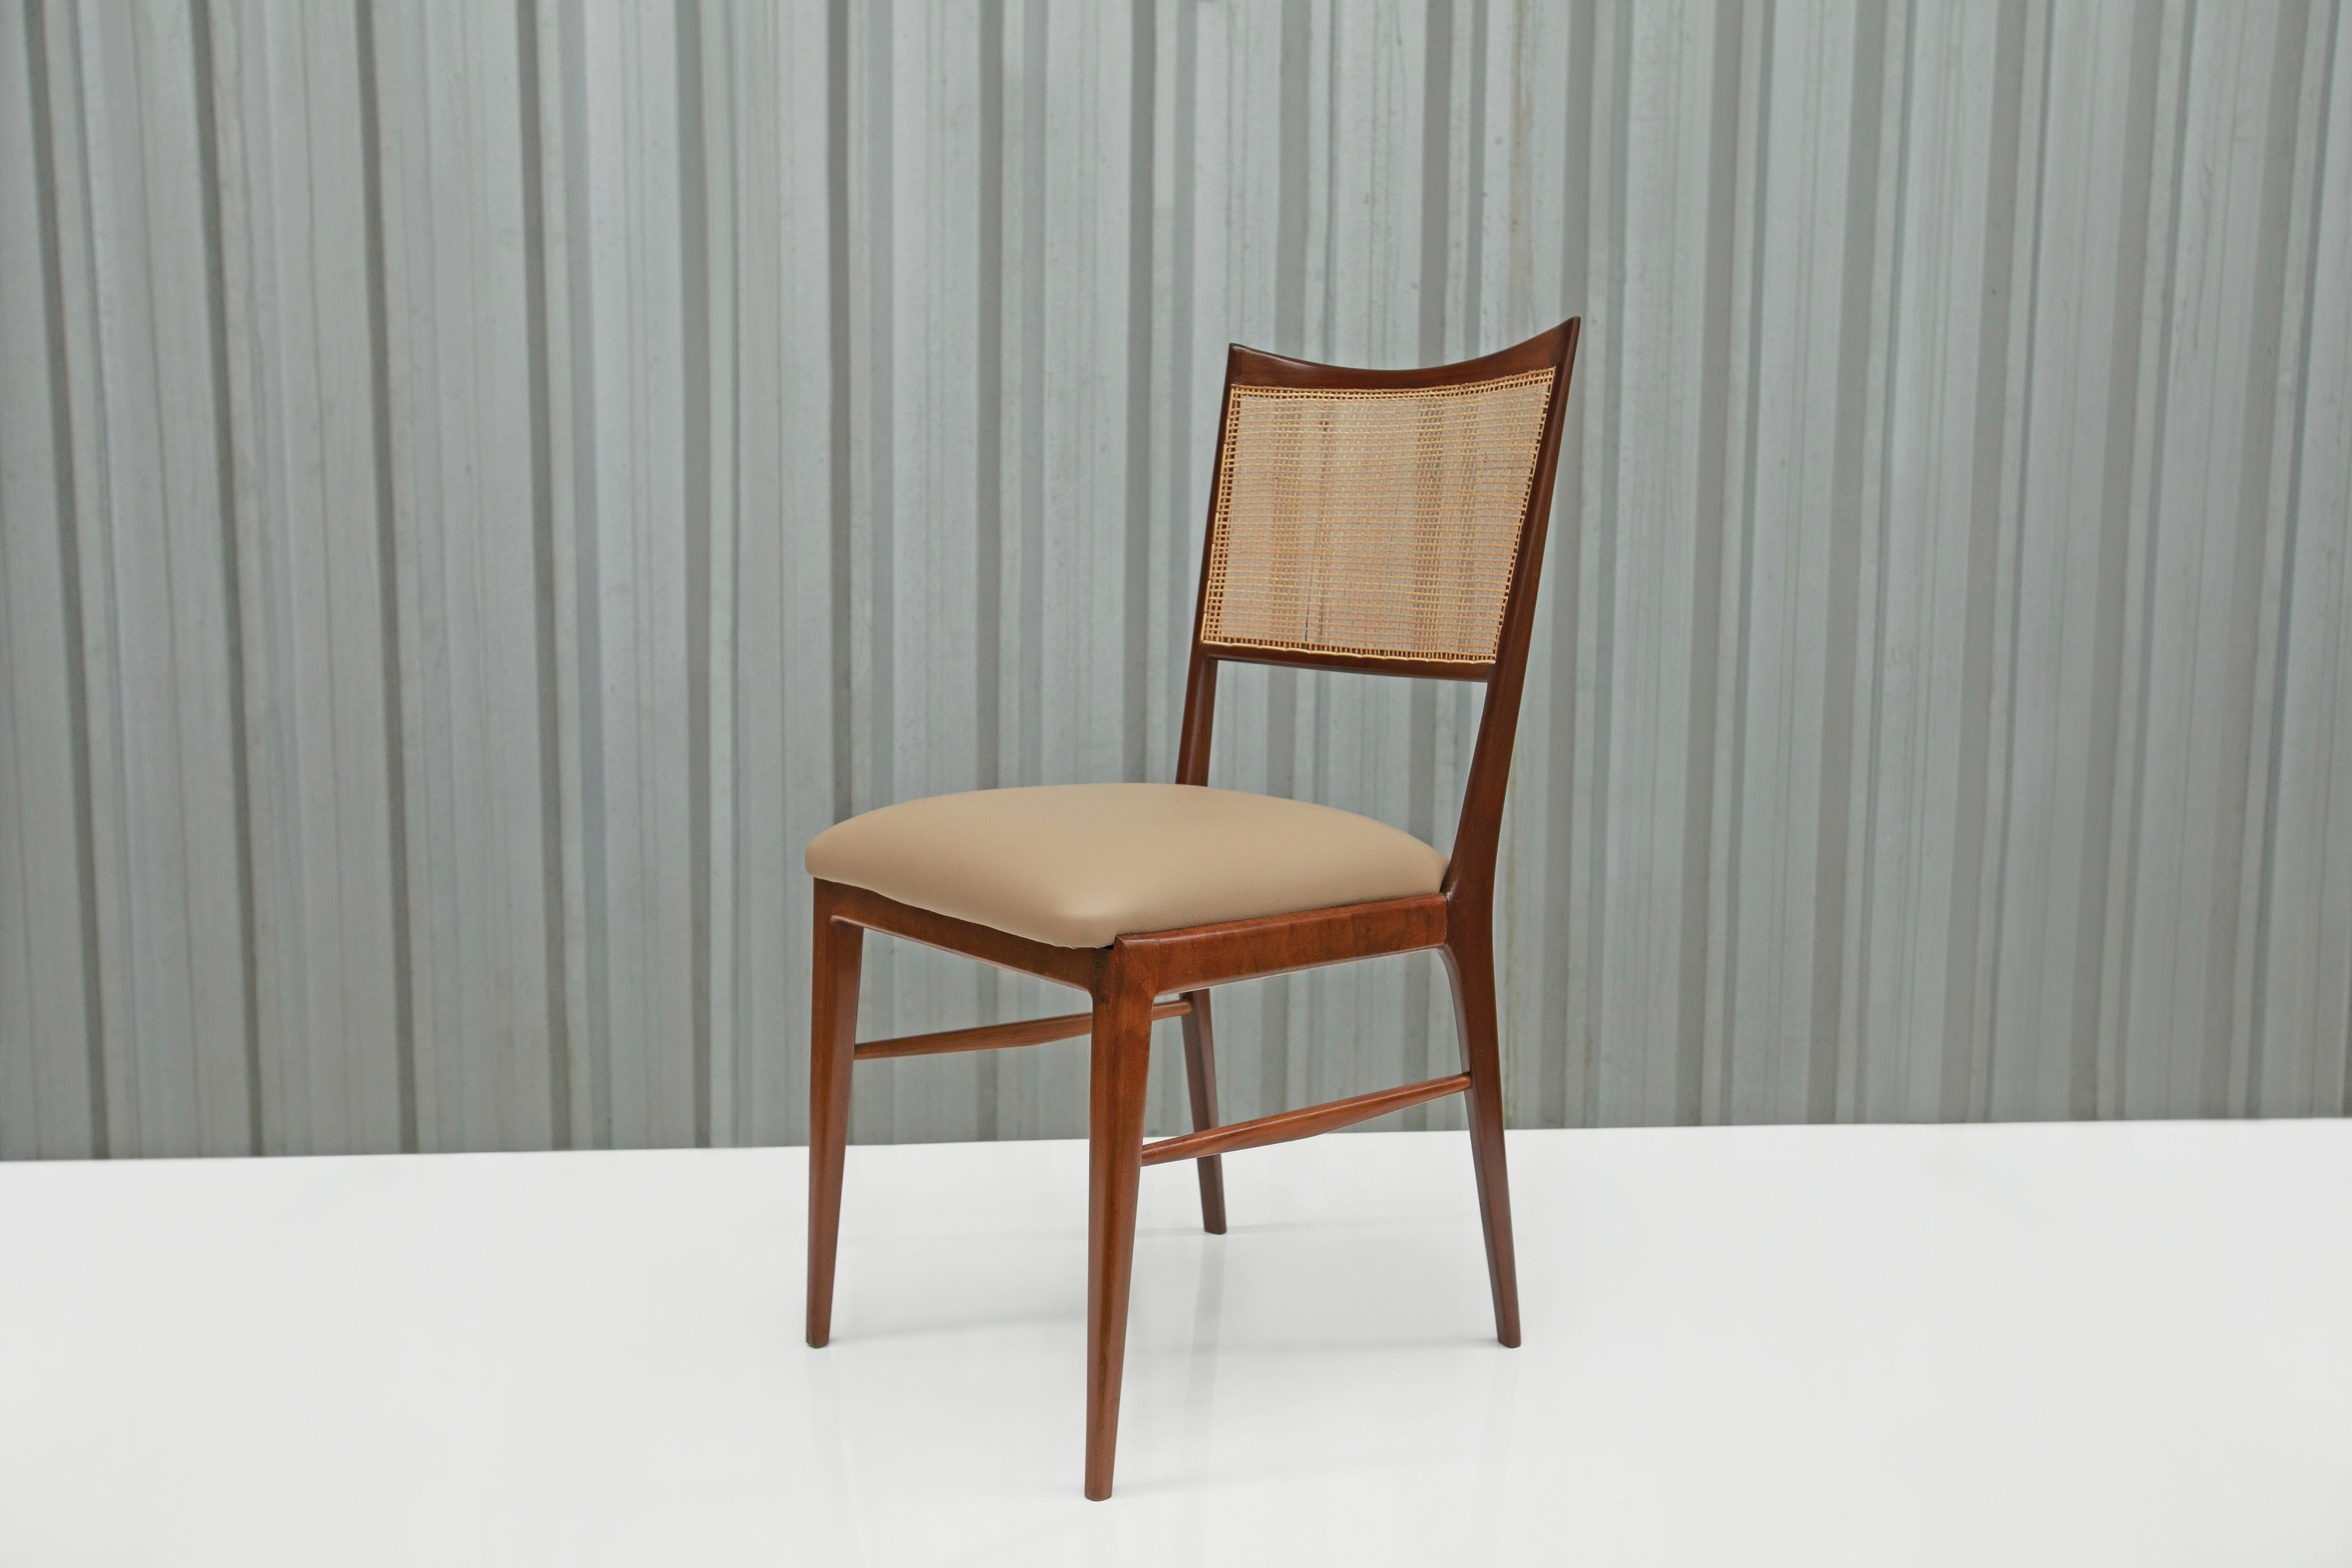 Available today in NYC, with free domestic shipping included, these Brazilian Modern Set of Four Chairs in Hardwood & Beige Leather made in the sixties are nothing less than spectacular!

This set comes with four chairs. The frame of the chairs are